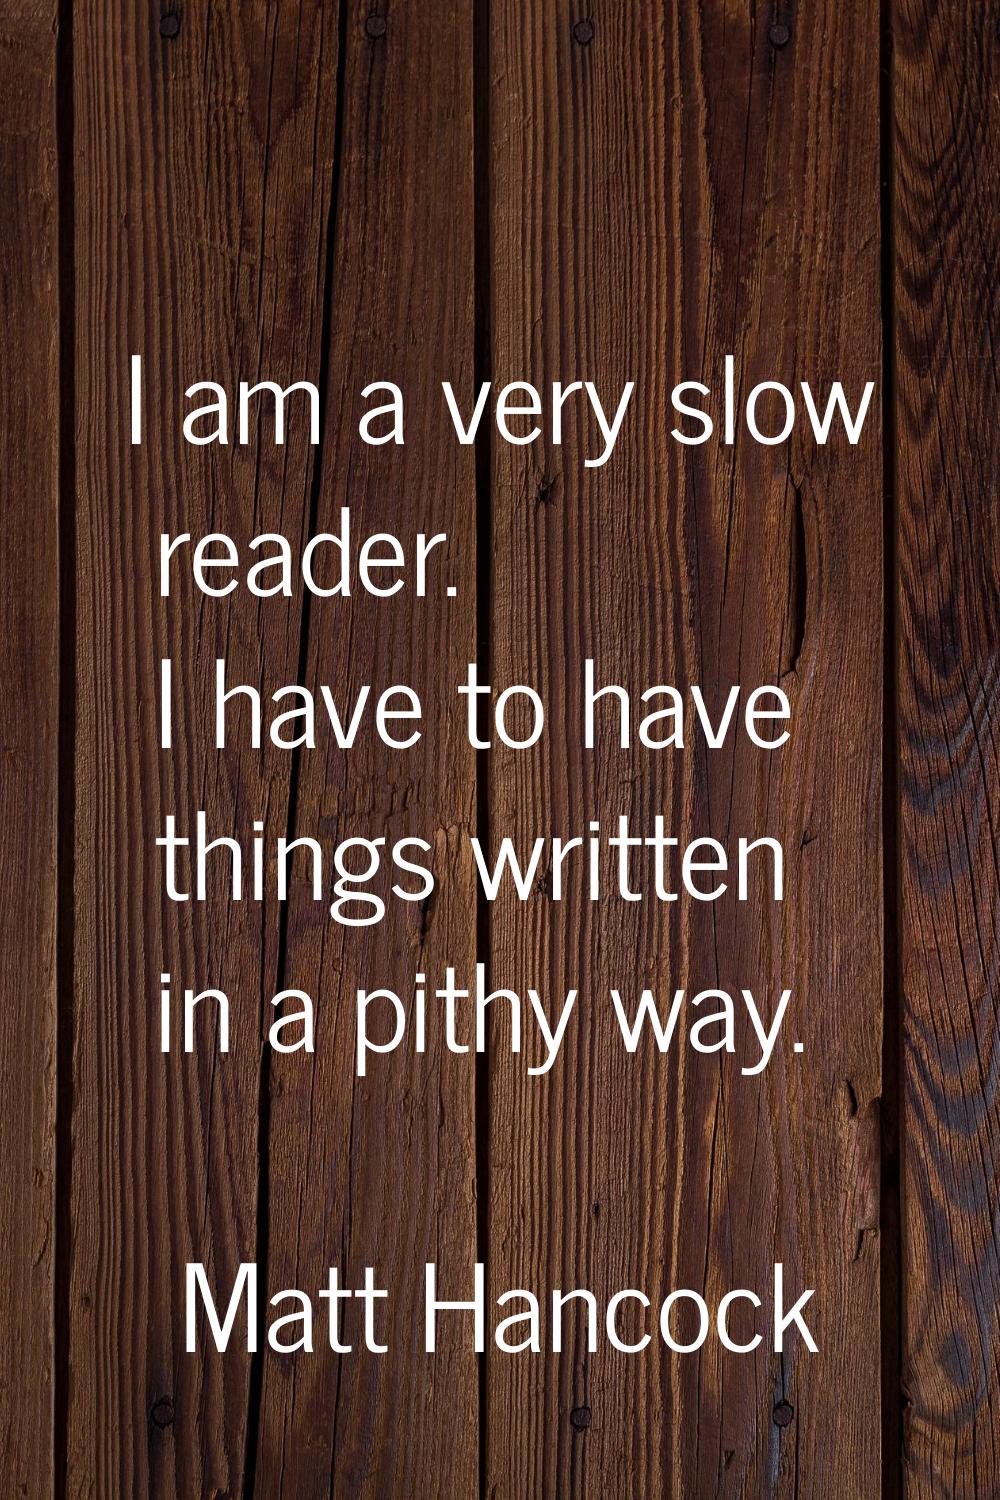 I am a very slow reader. I have to have things written in a pithy way.